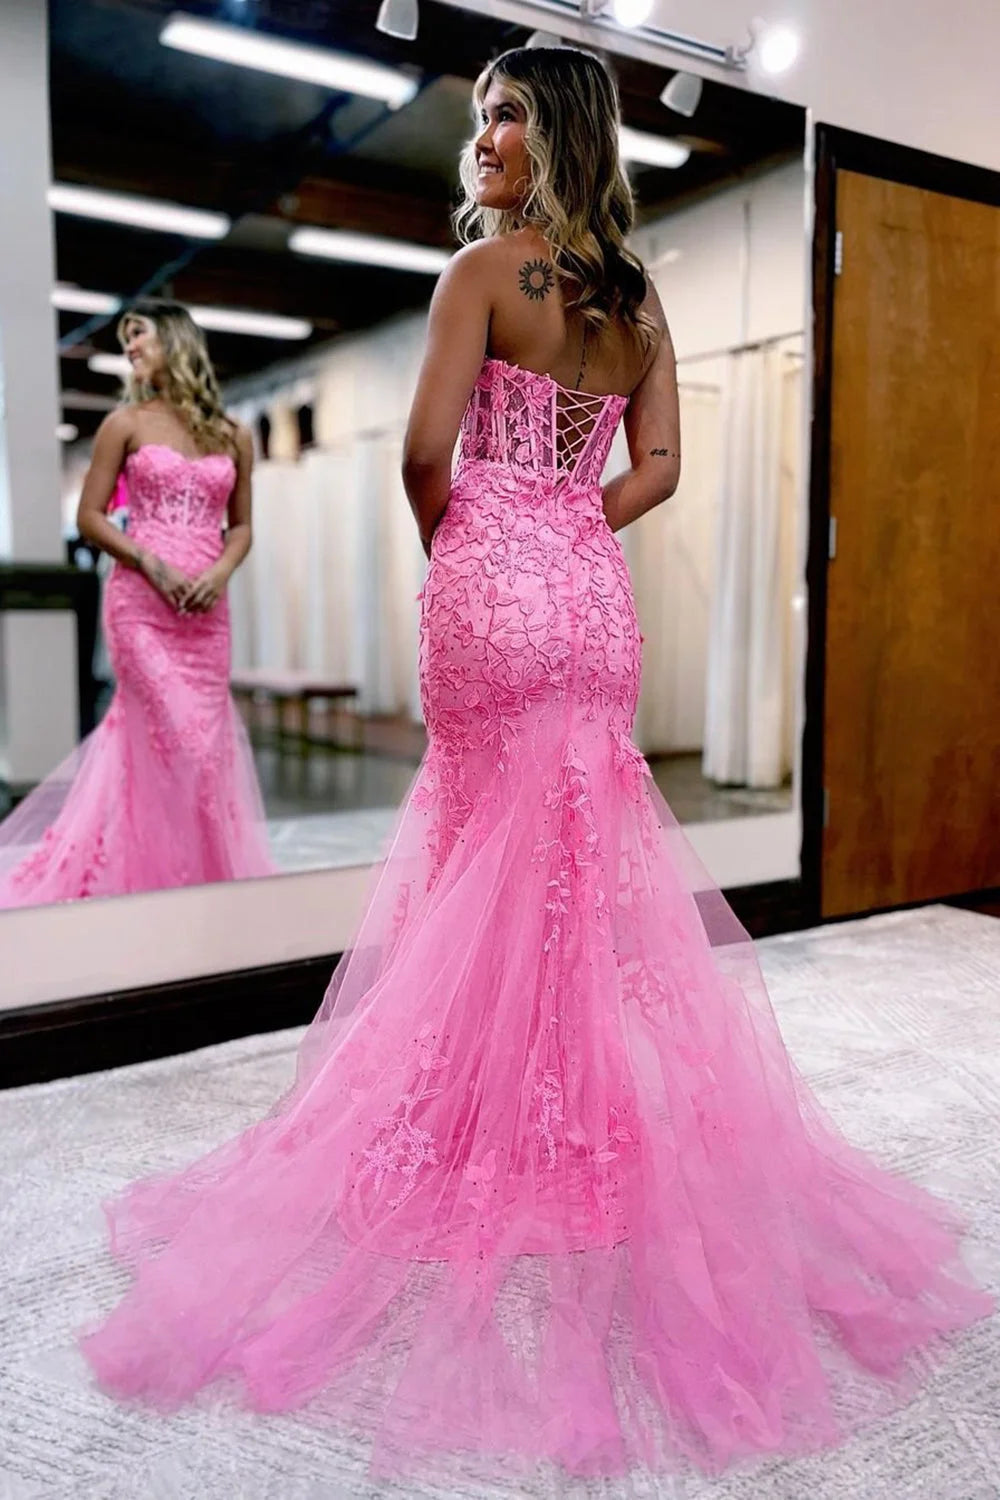 Evie |Mermaid Sweetheart Neck Lace Long Prom Dress With Appliques